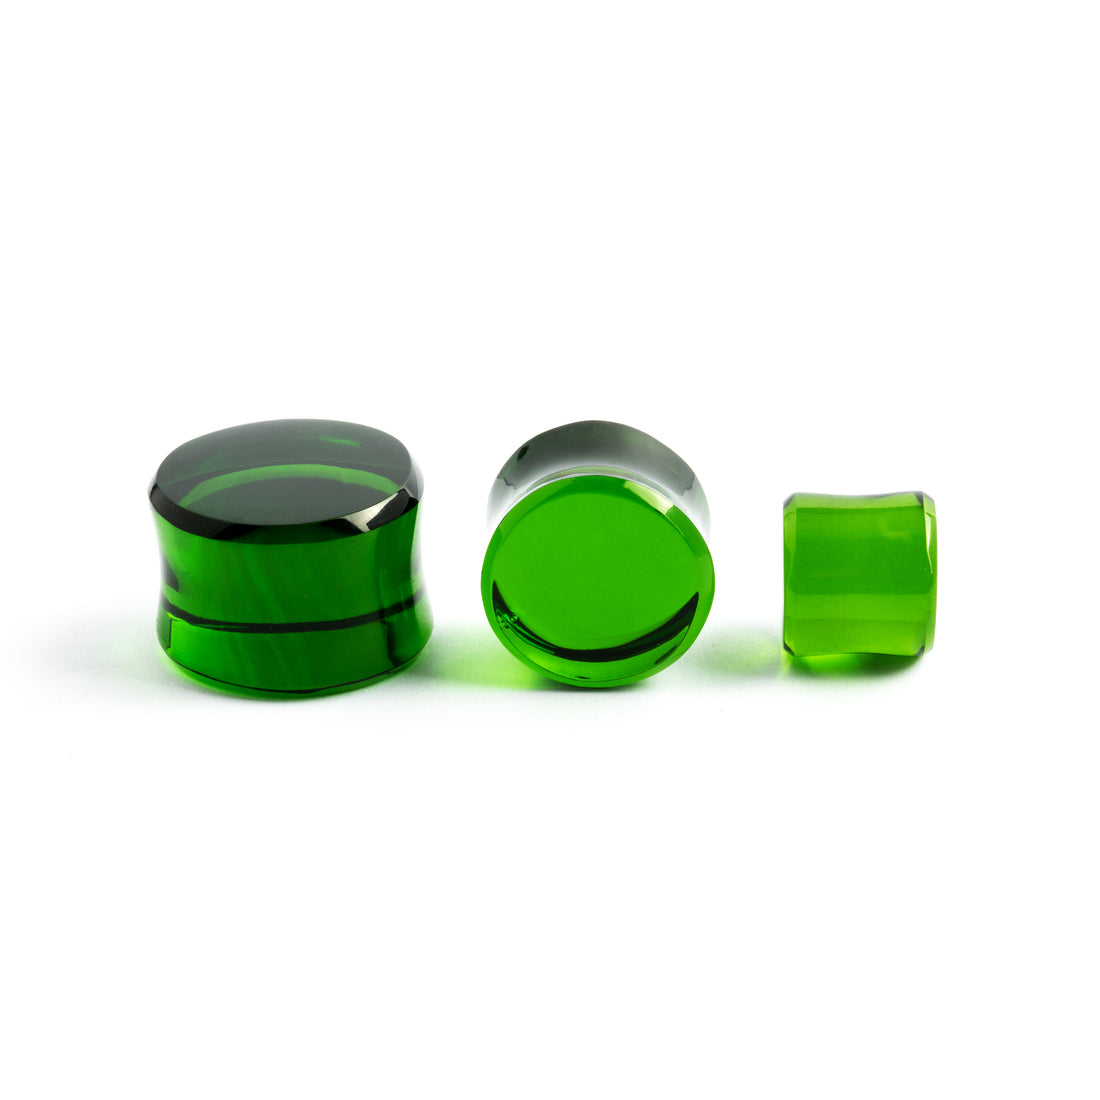 several sizes of Green Obsidian stone double flare ear plugs in different angles